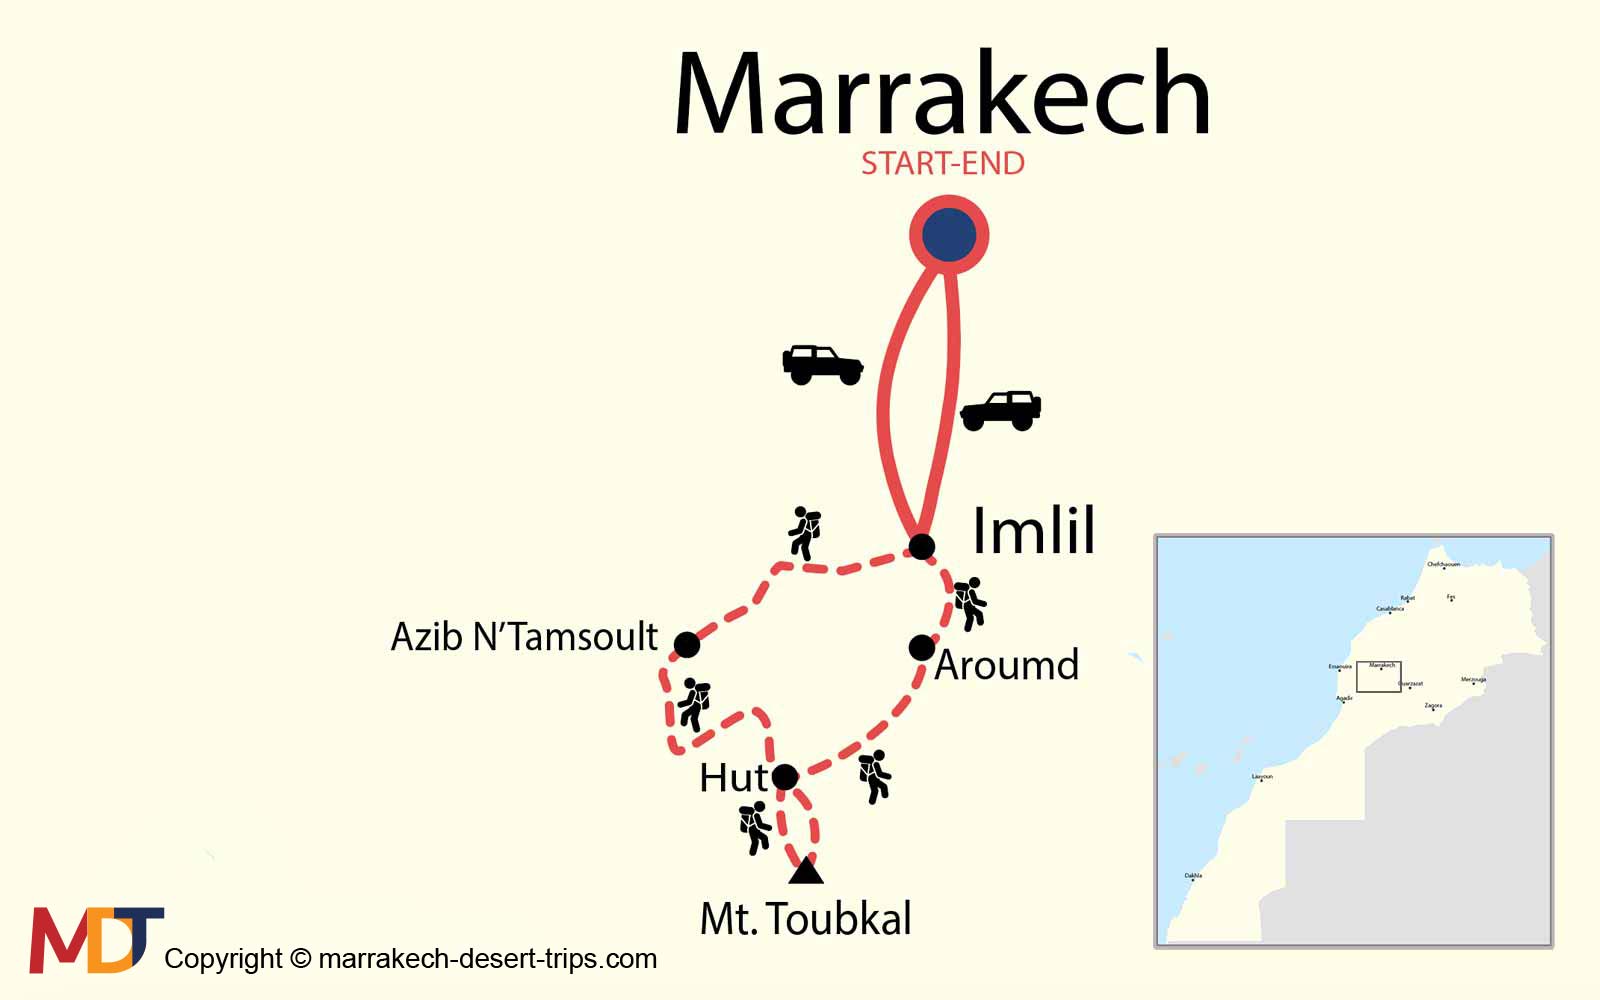 Map illustrating the 3-Day Mount Toubkal Trek route starting and ending in Marrakech.